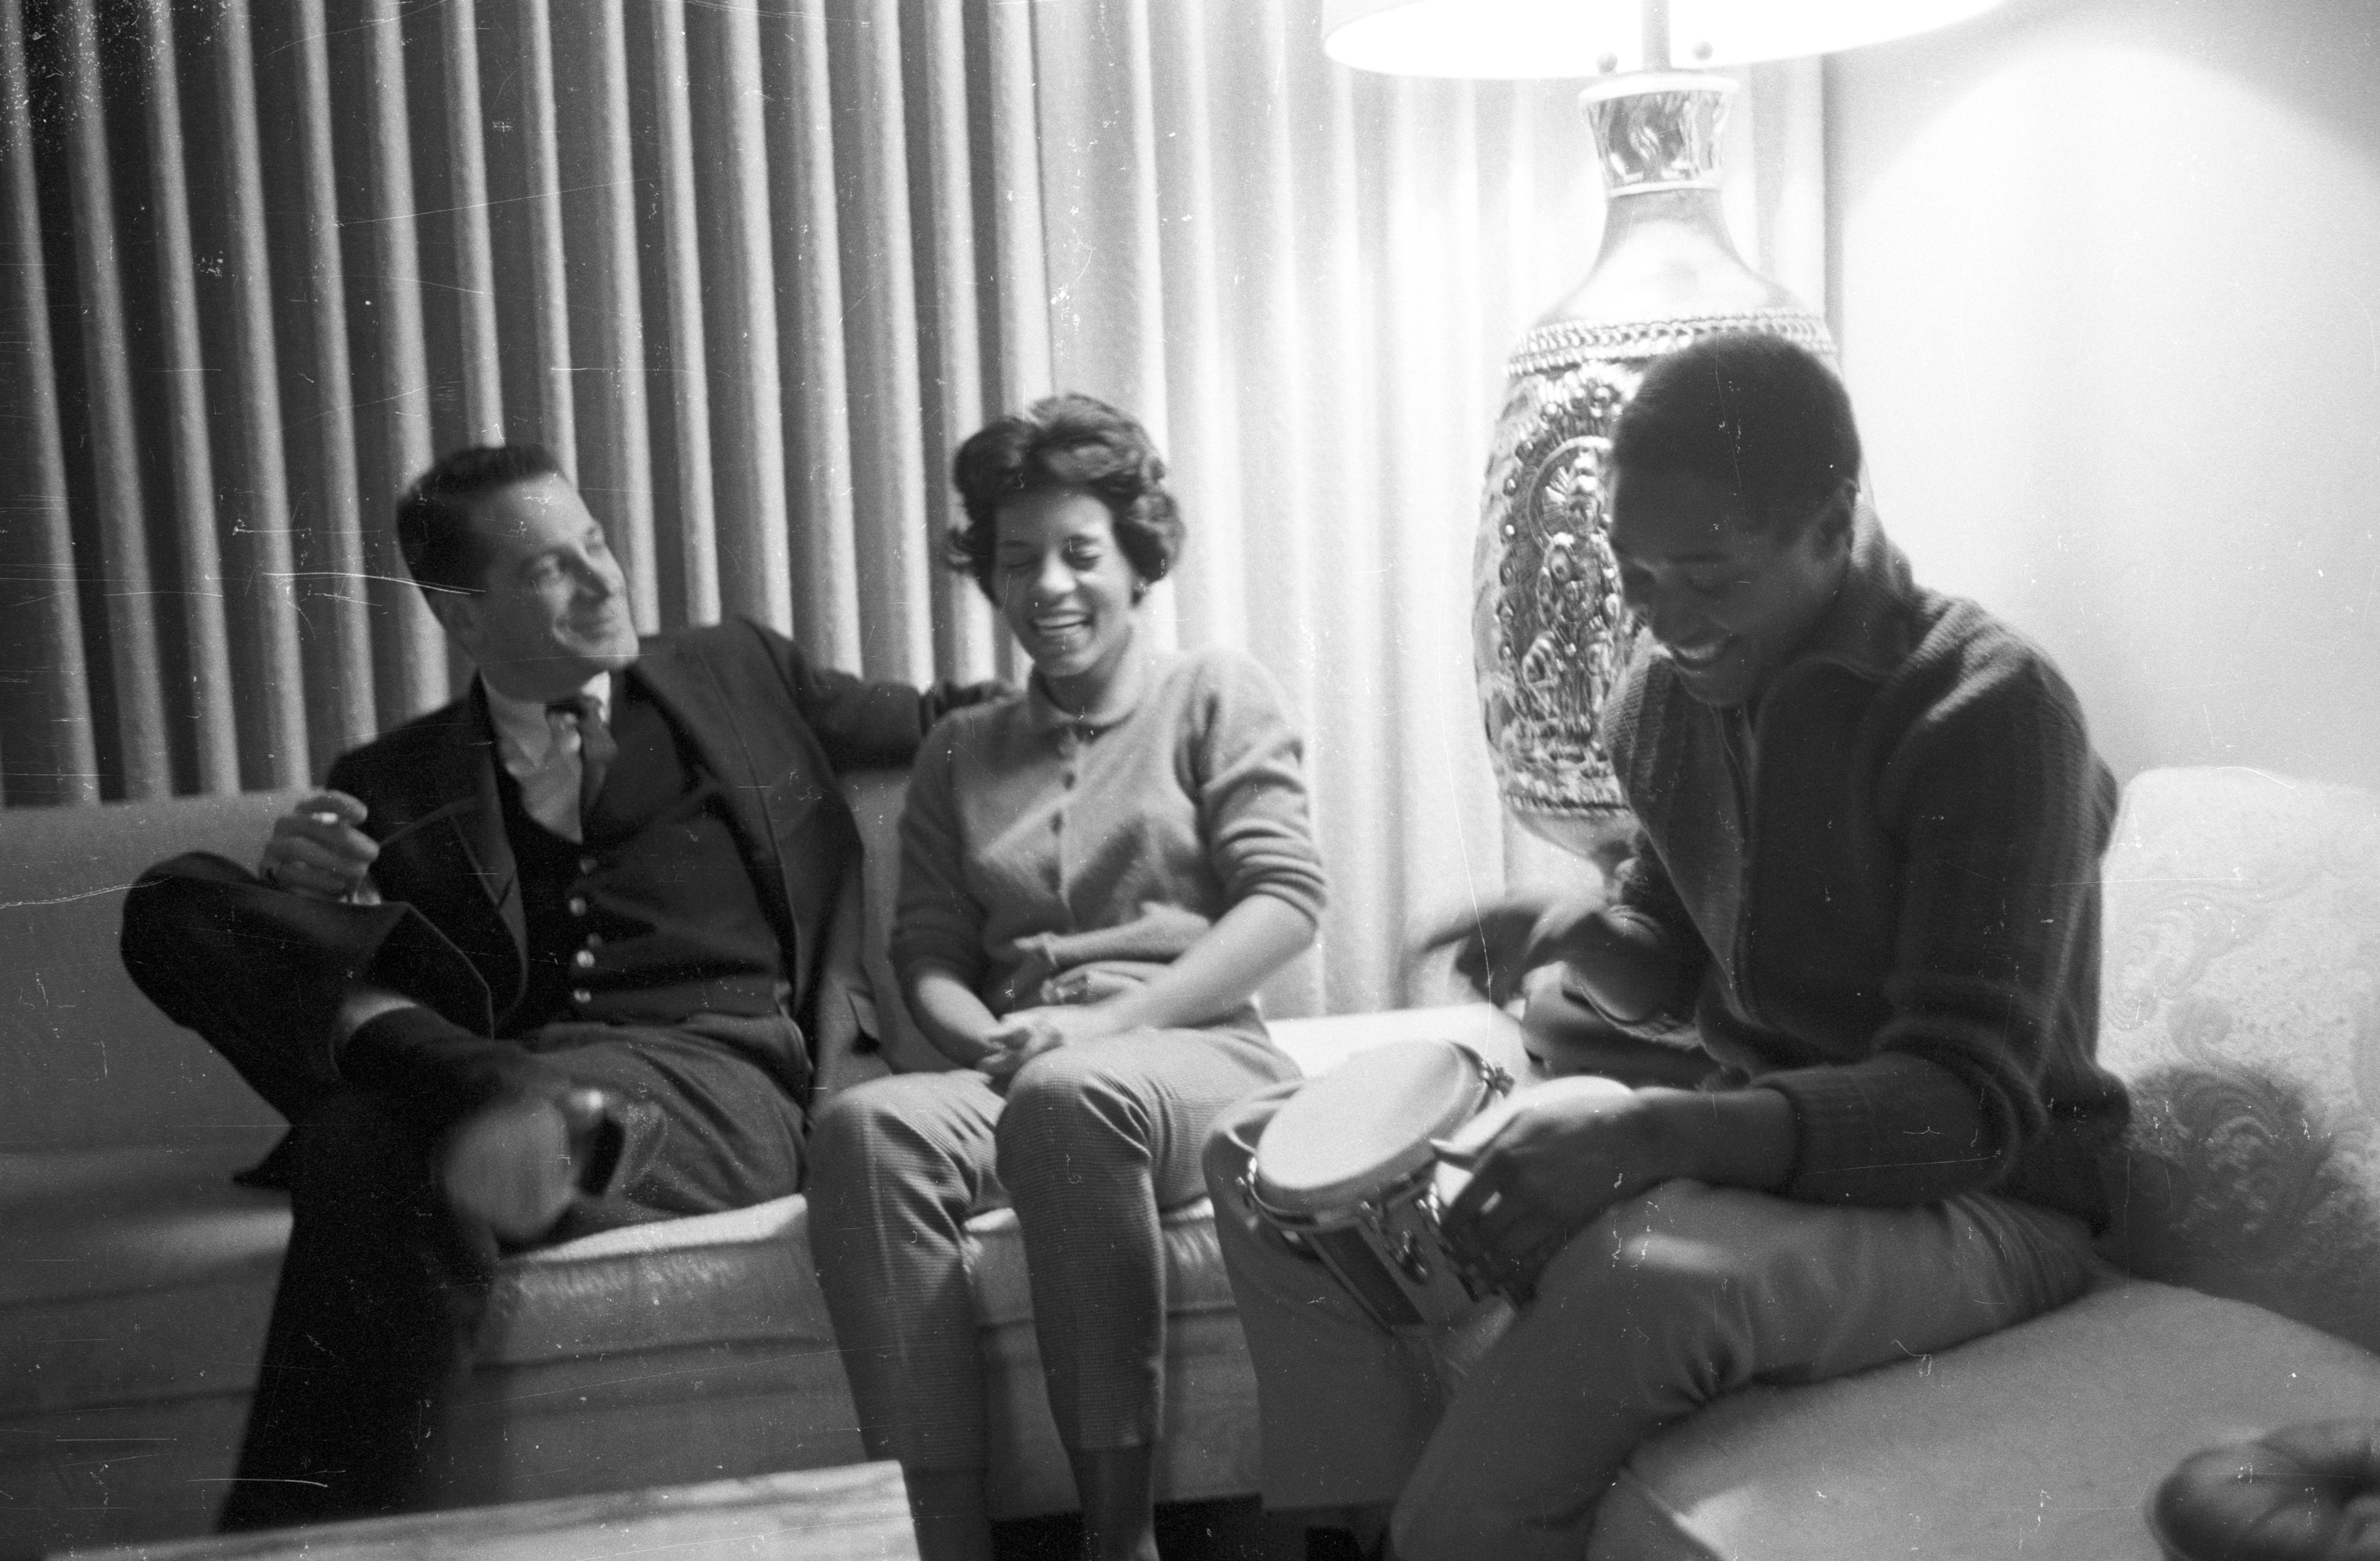 Sam and Barbara Cooke with an unidentified man on November 30, 1960, in Los Angeles, California | Source: Getty Images